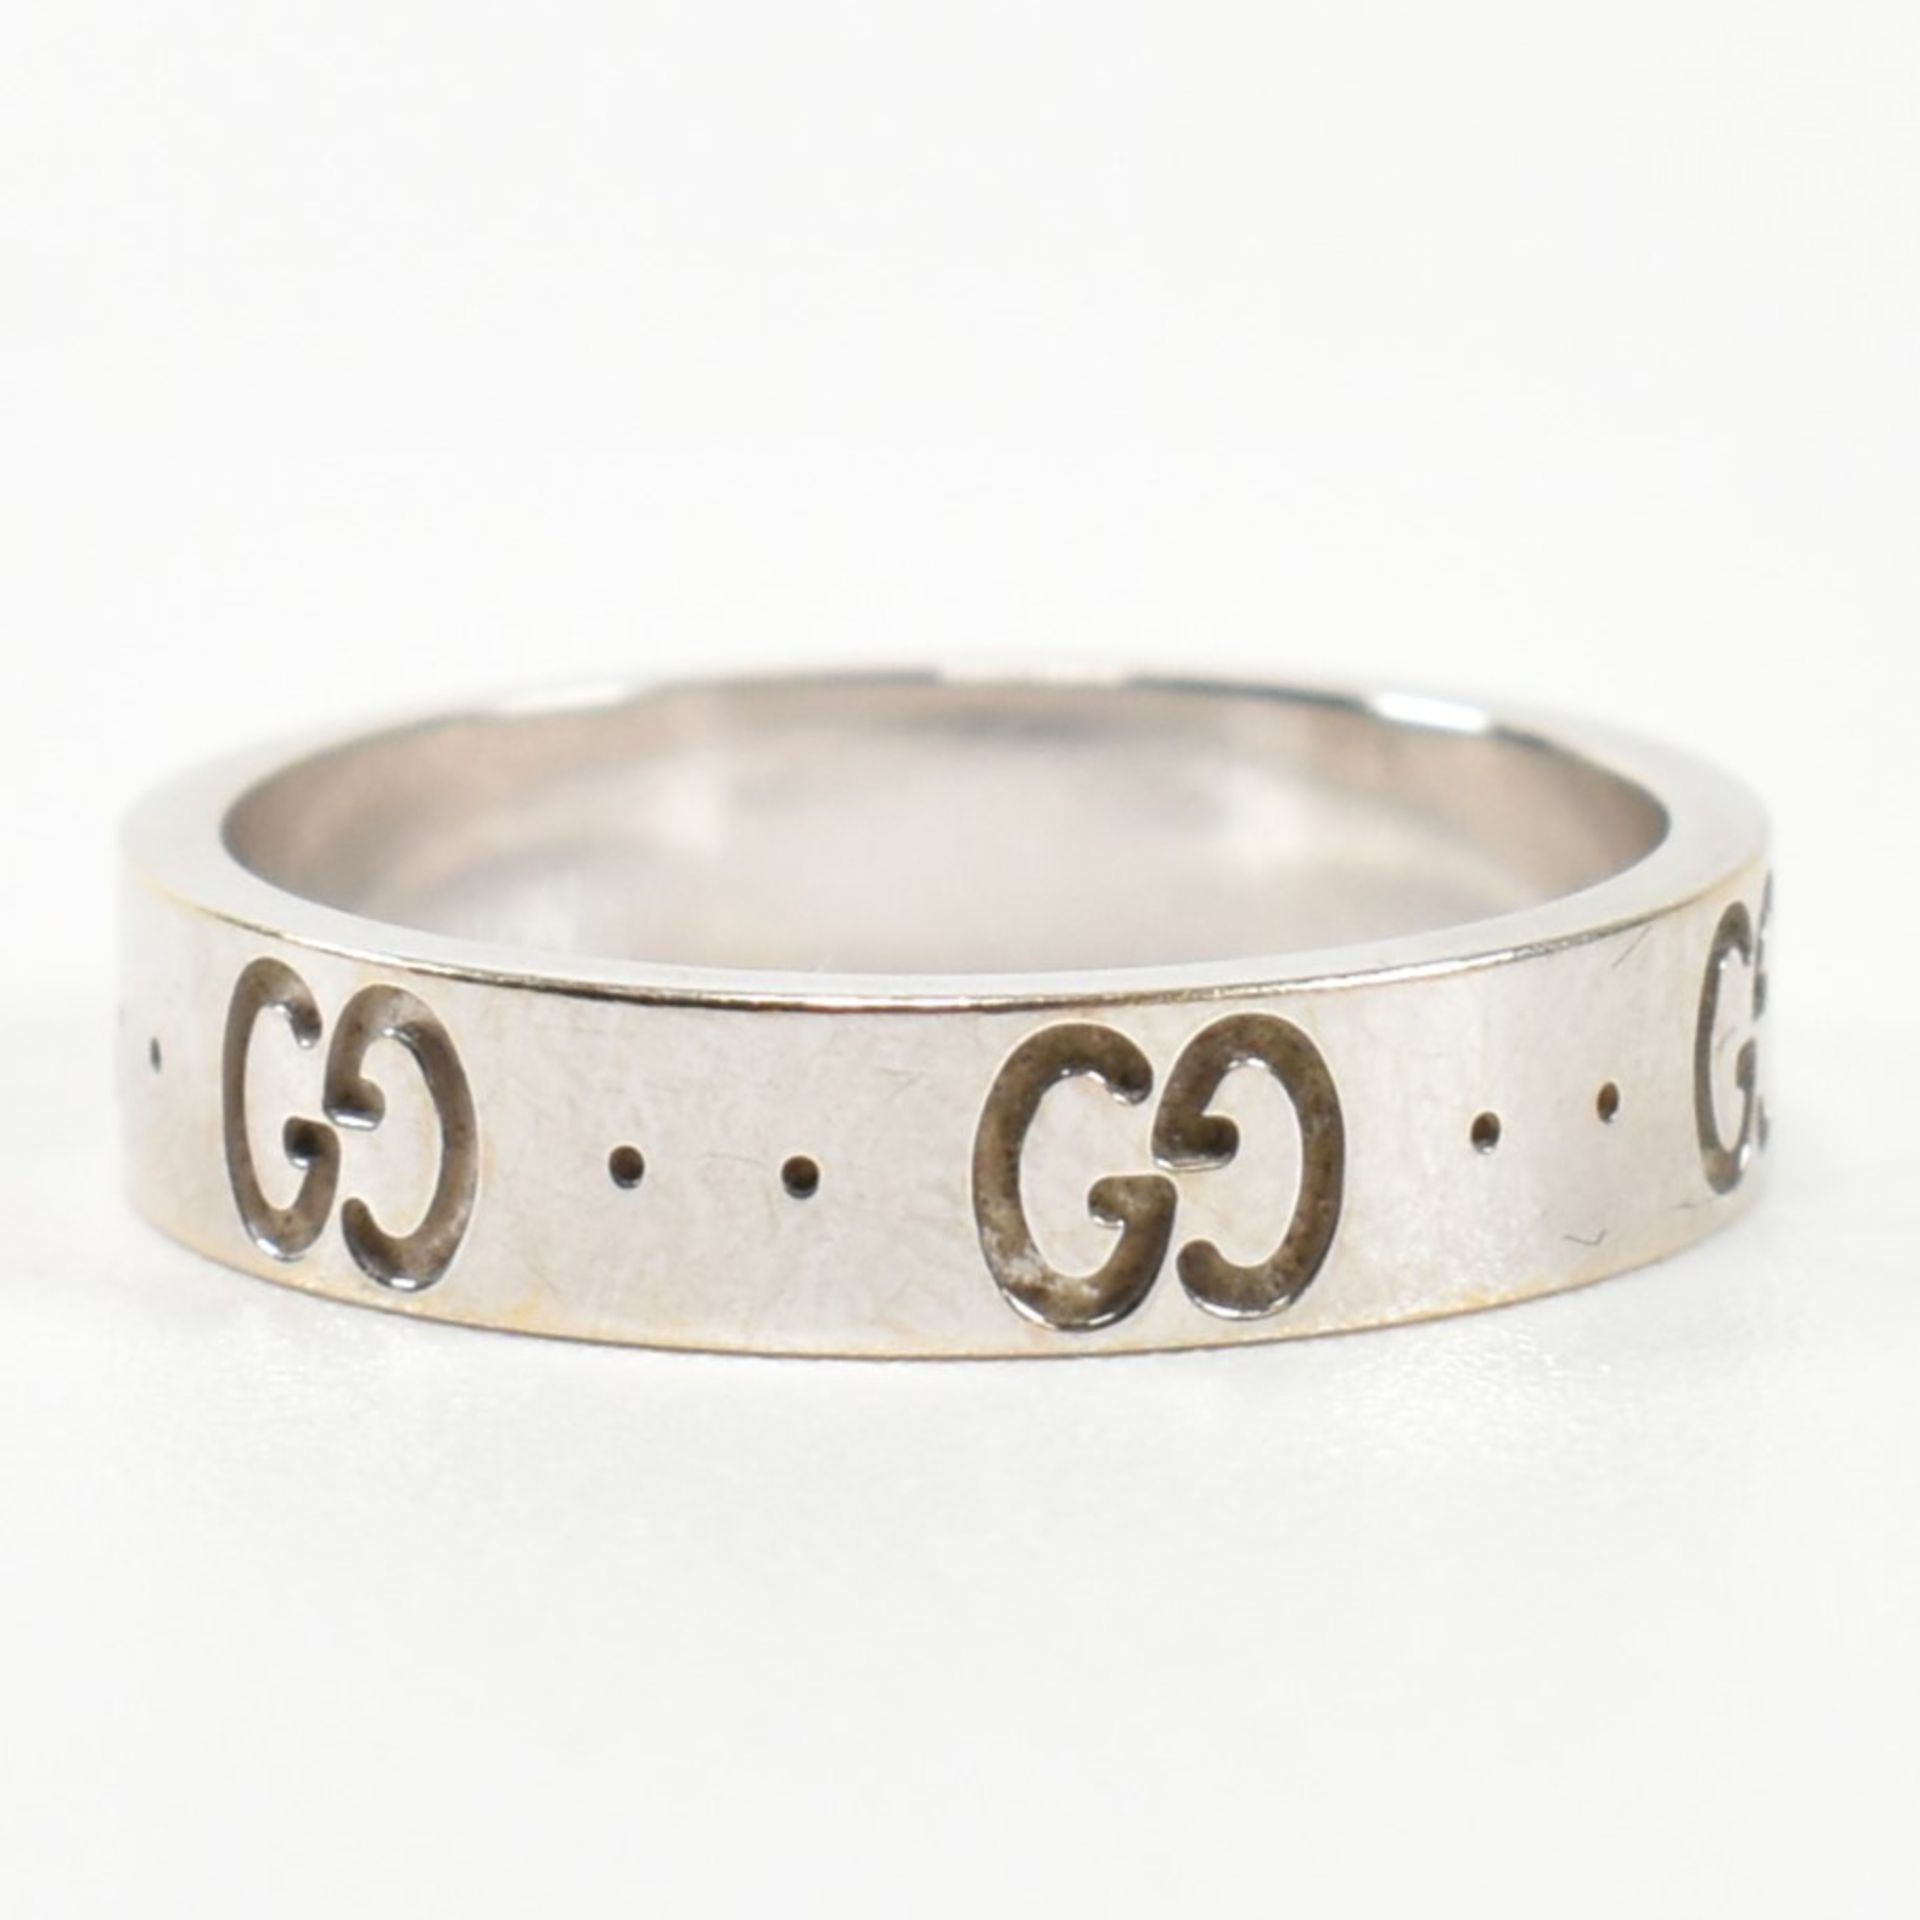 HALLMARKED 18CT WHITE GOLD GUCCI ICON BAND RING